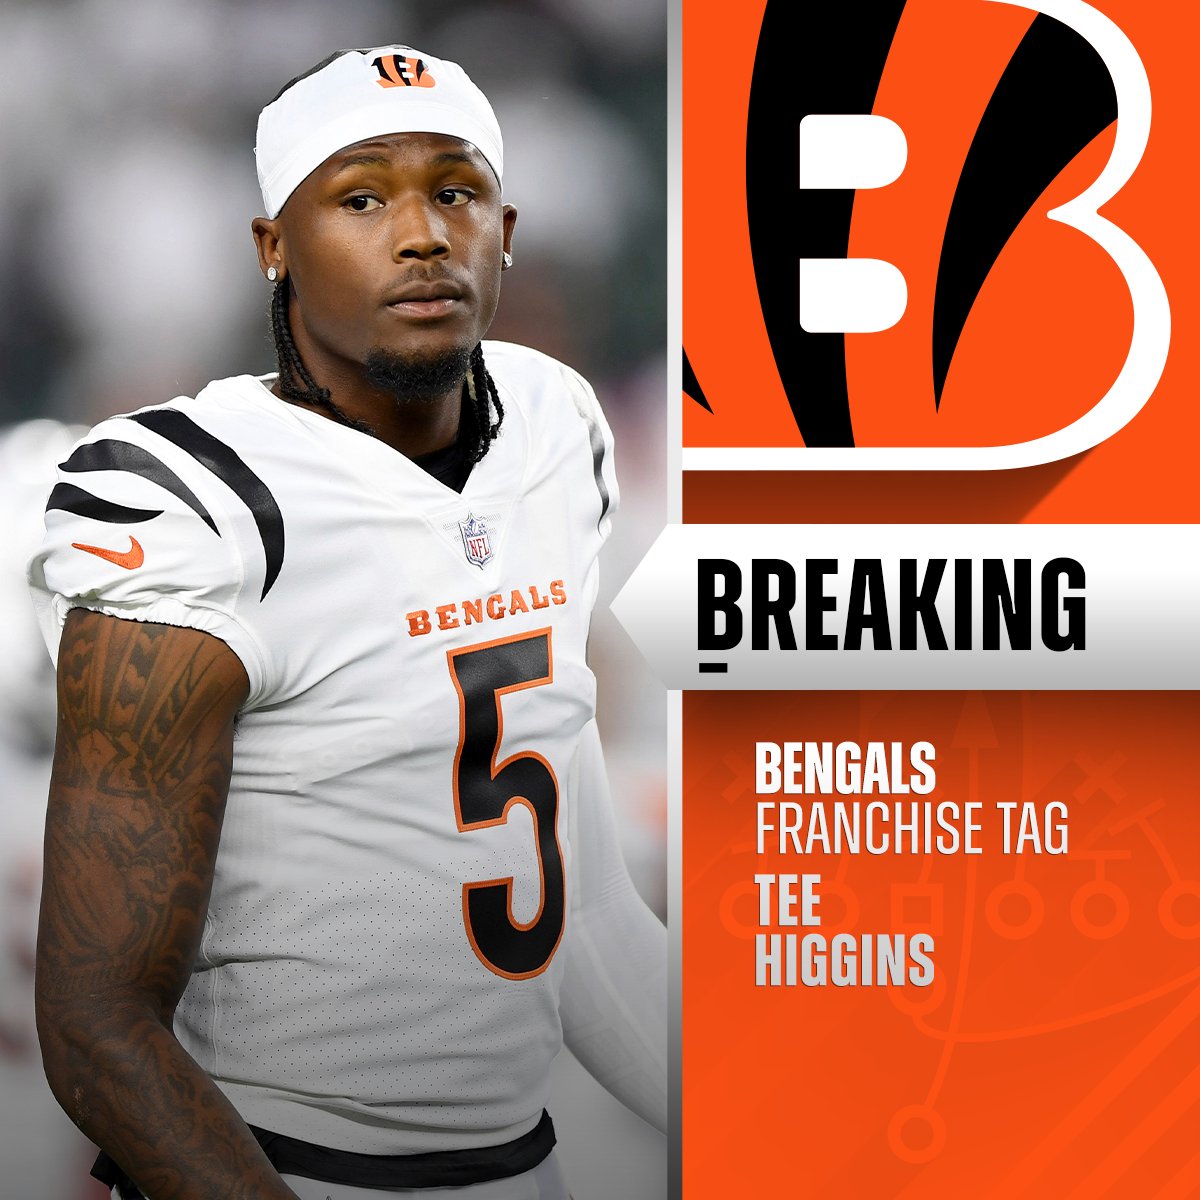 Bengals have informed WR Tee Higgins they are franchising him. (via @RapSheet)